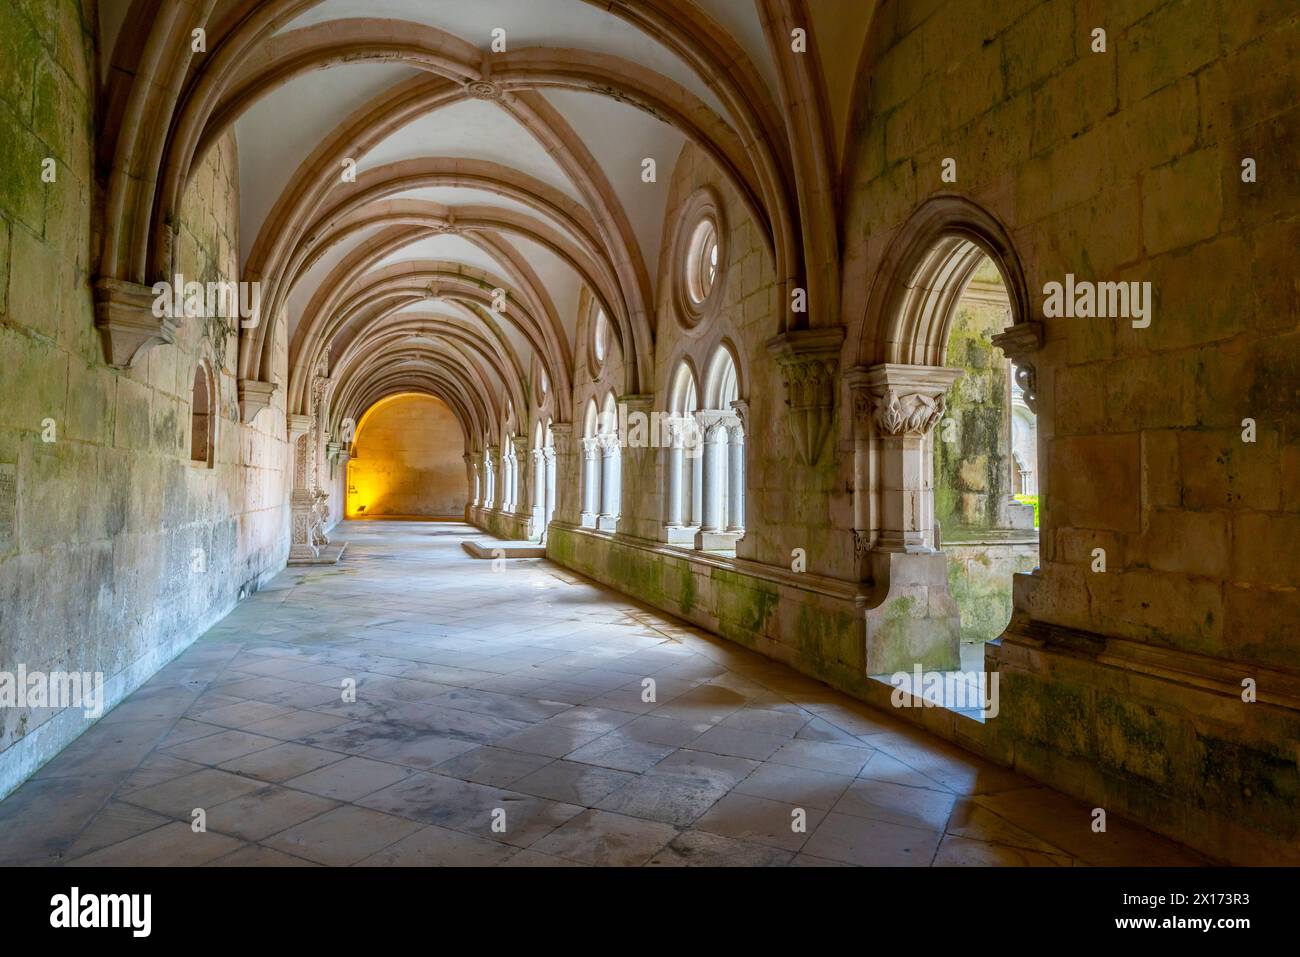 Vaulted passageways in the cloister. The Alcobaça Monastery (Mosteiro de Alcobaça)  or Alcobasa Monastery  is a Catholic monastic complex located in t Stock Photo